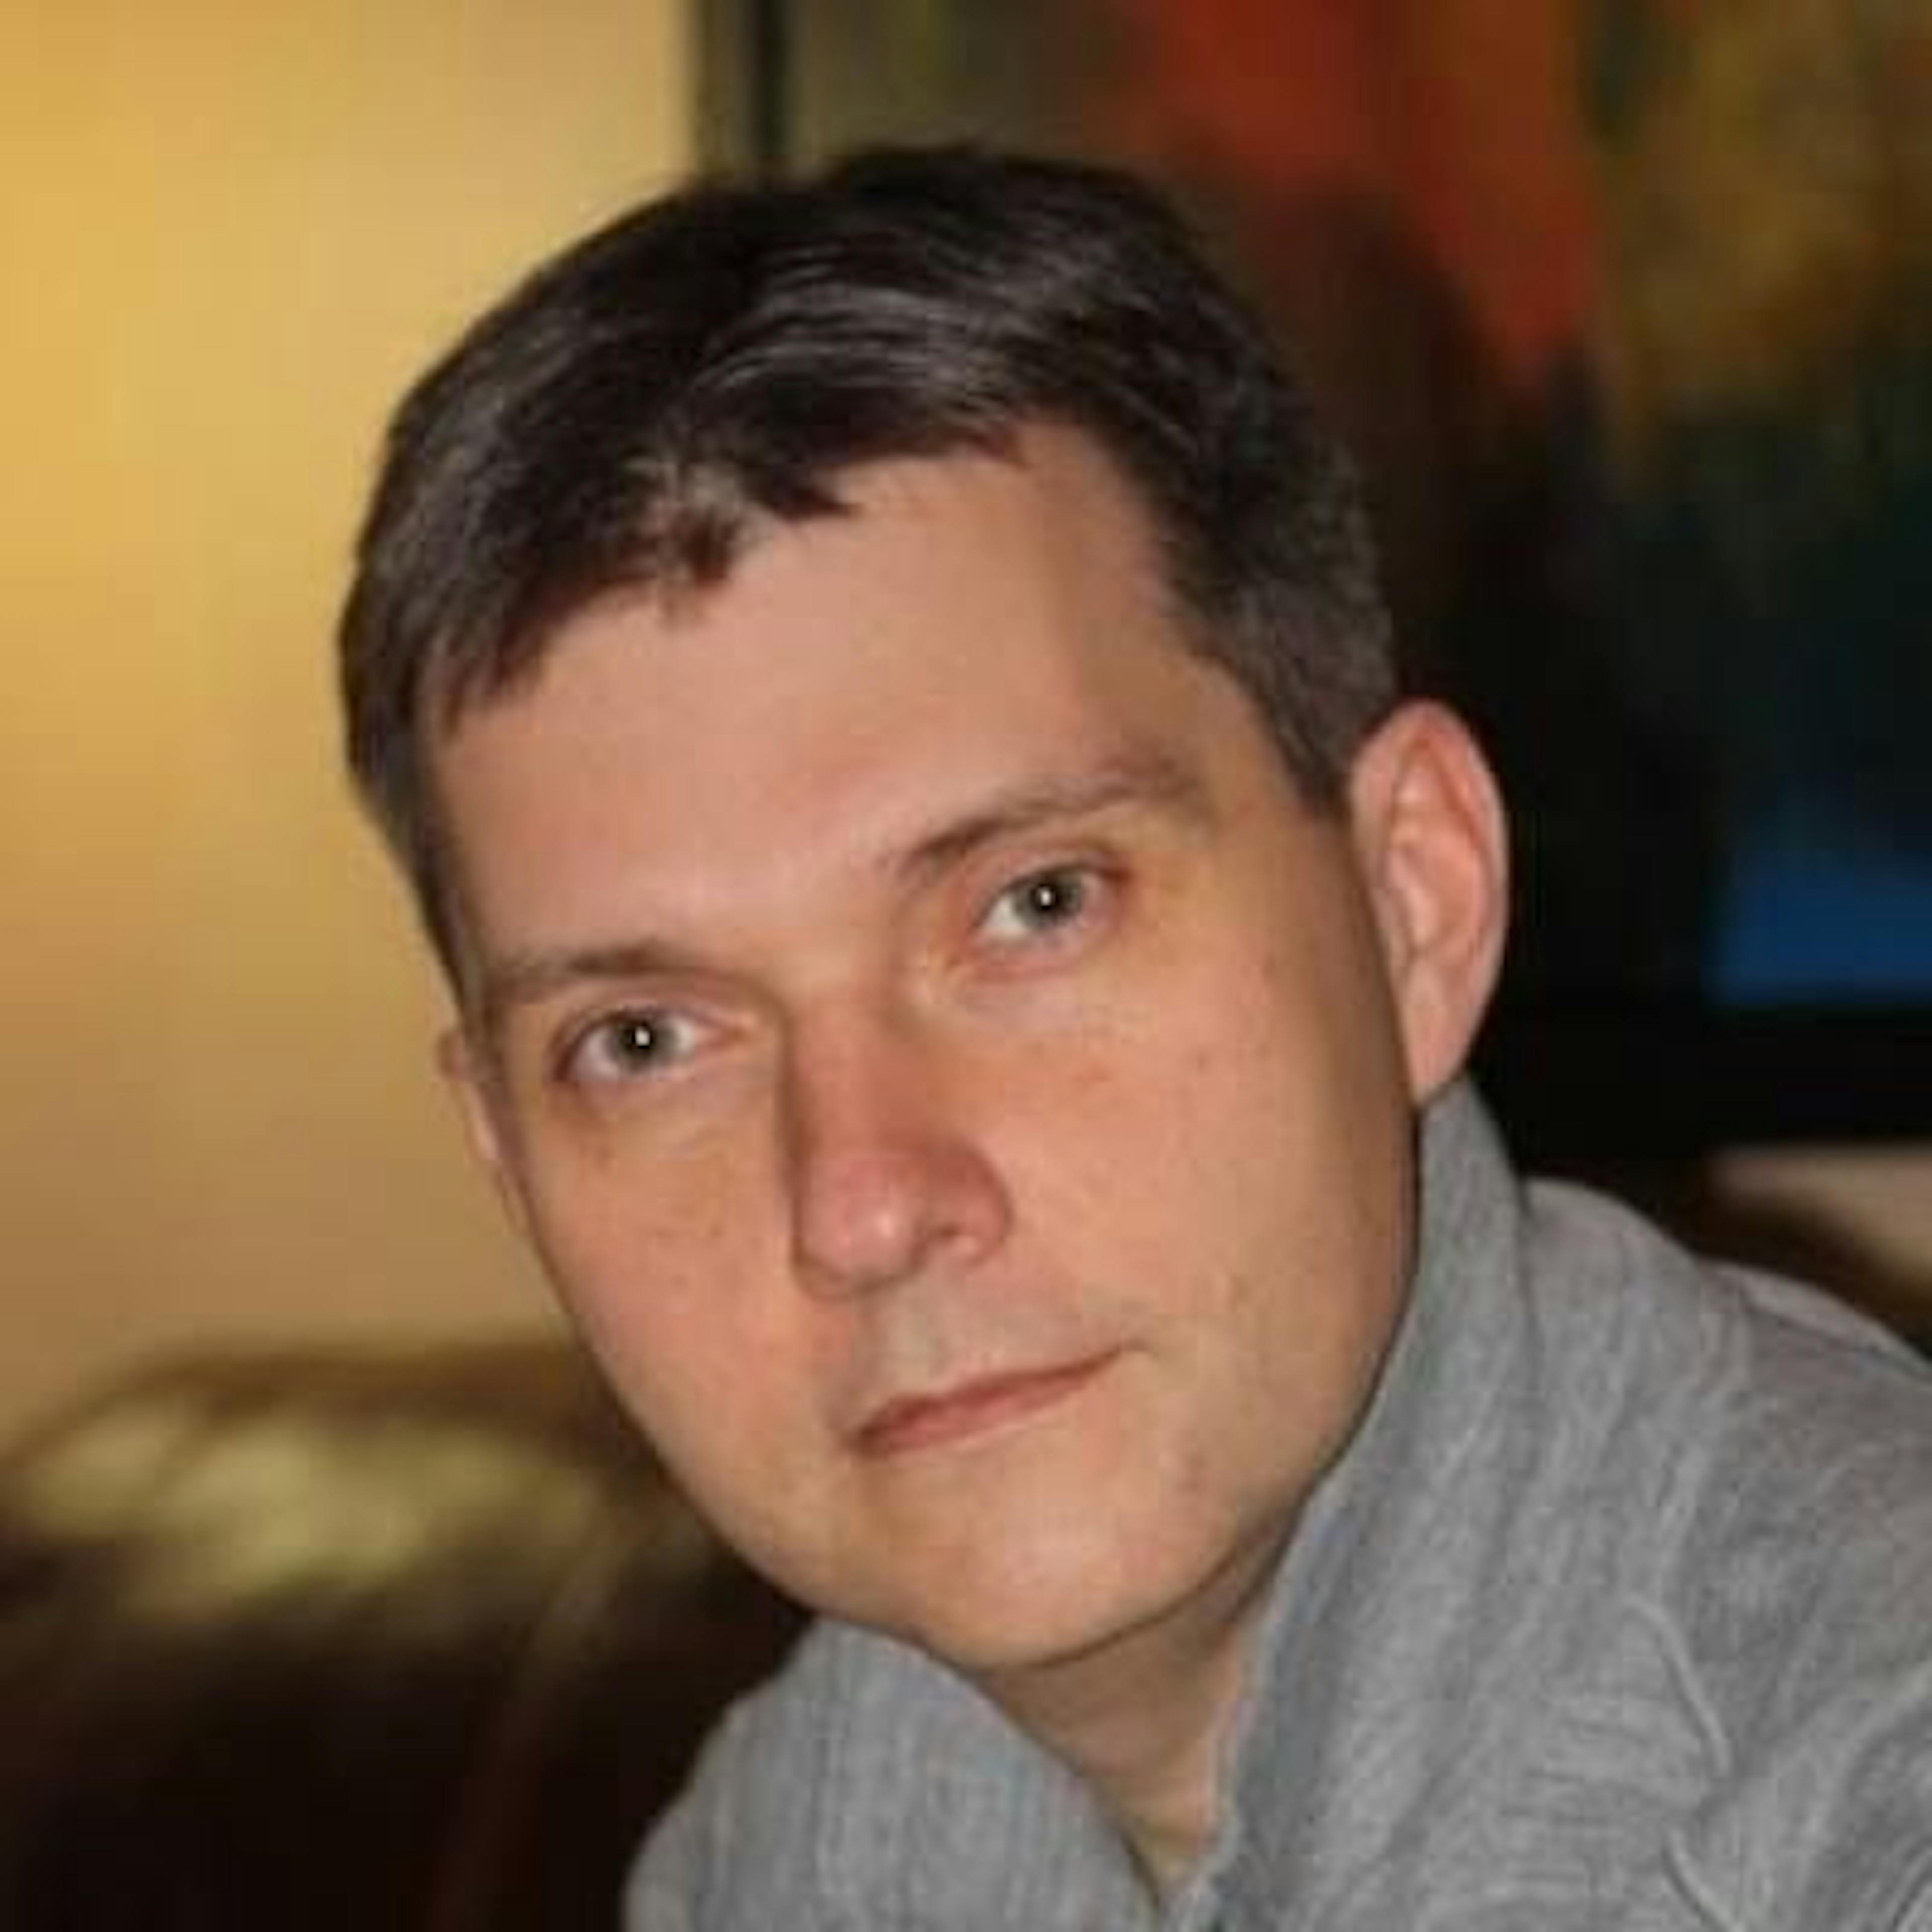 Aleksey HackerNoon profile picture